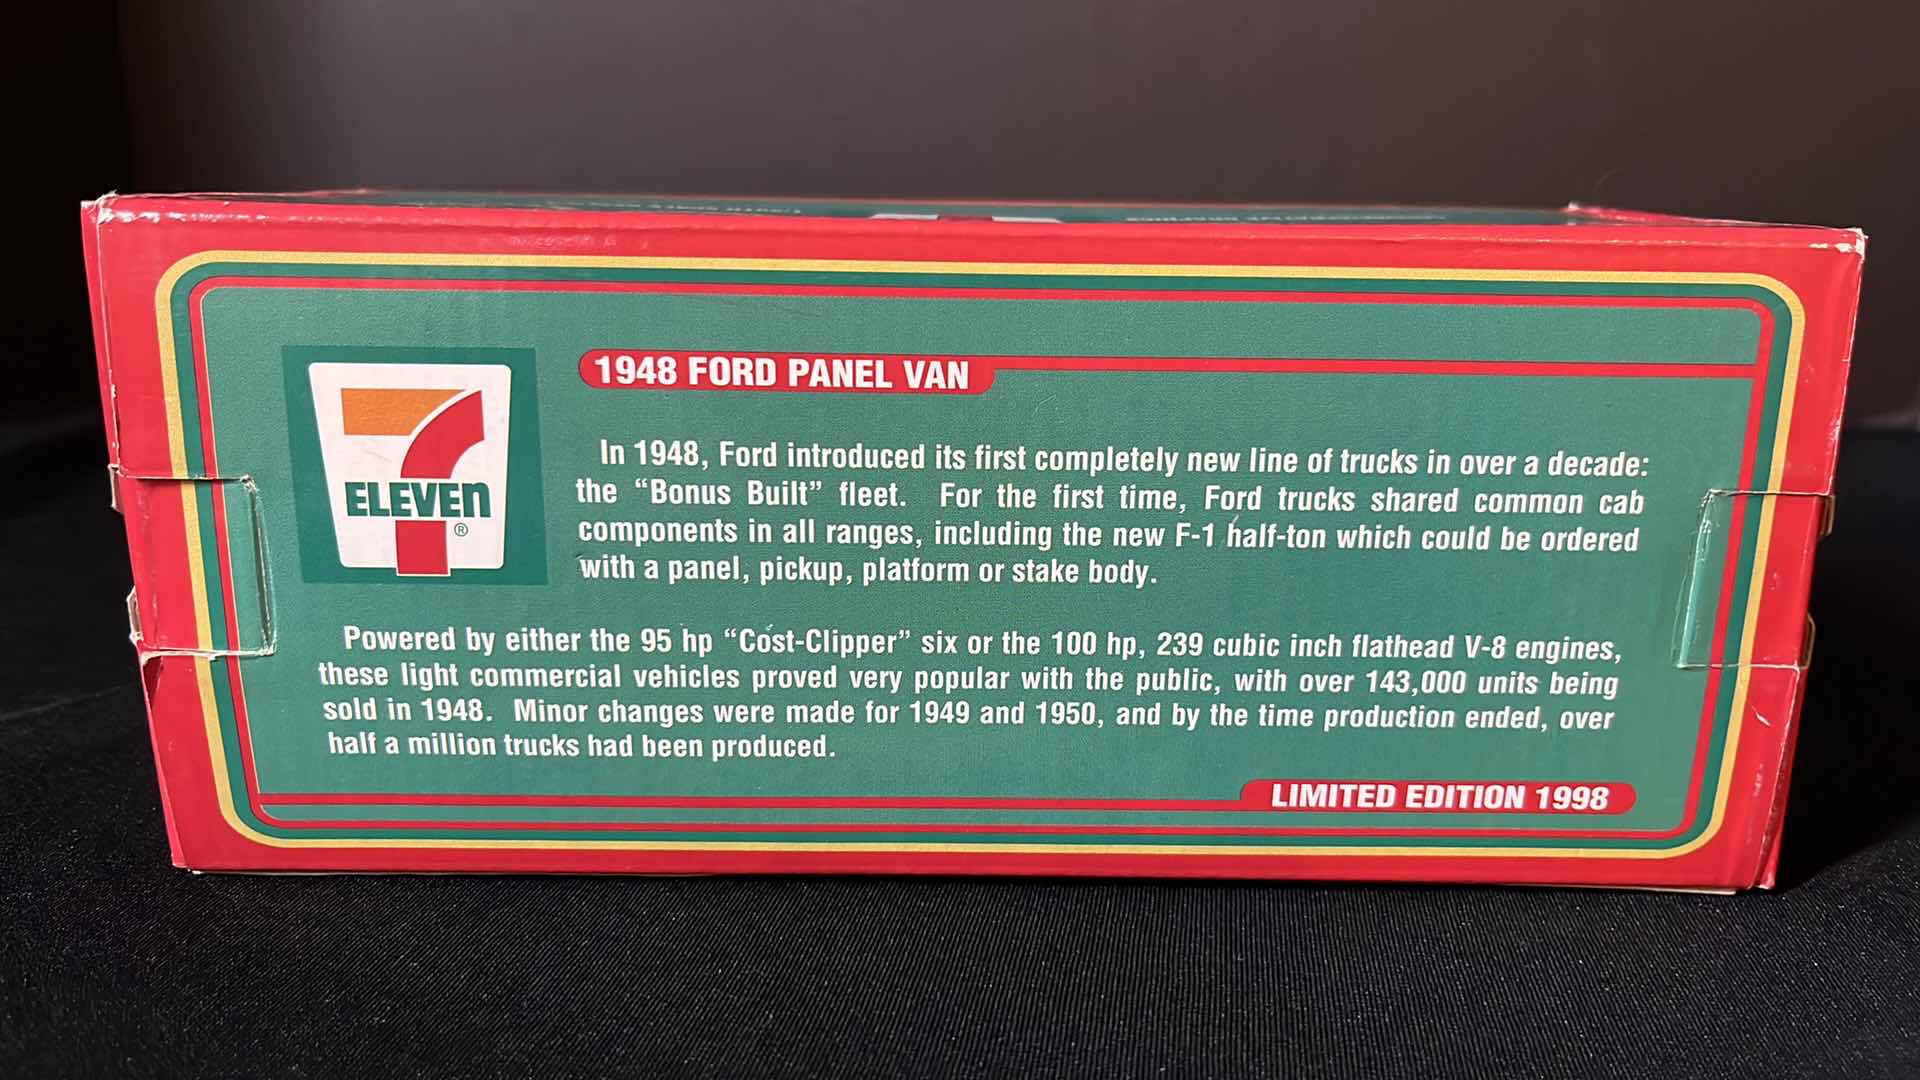 Photo 9 of VINTAGE FORD MOTOR COMPANY 7 ELEVEN 1948 FORD PANEL VAN COIN BANK (STOCK #68036)